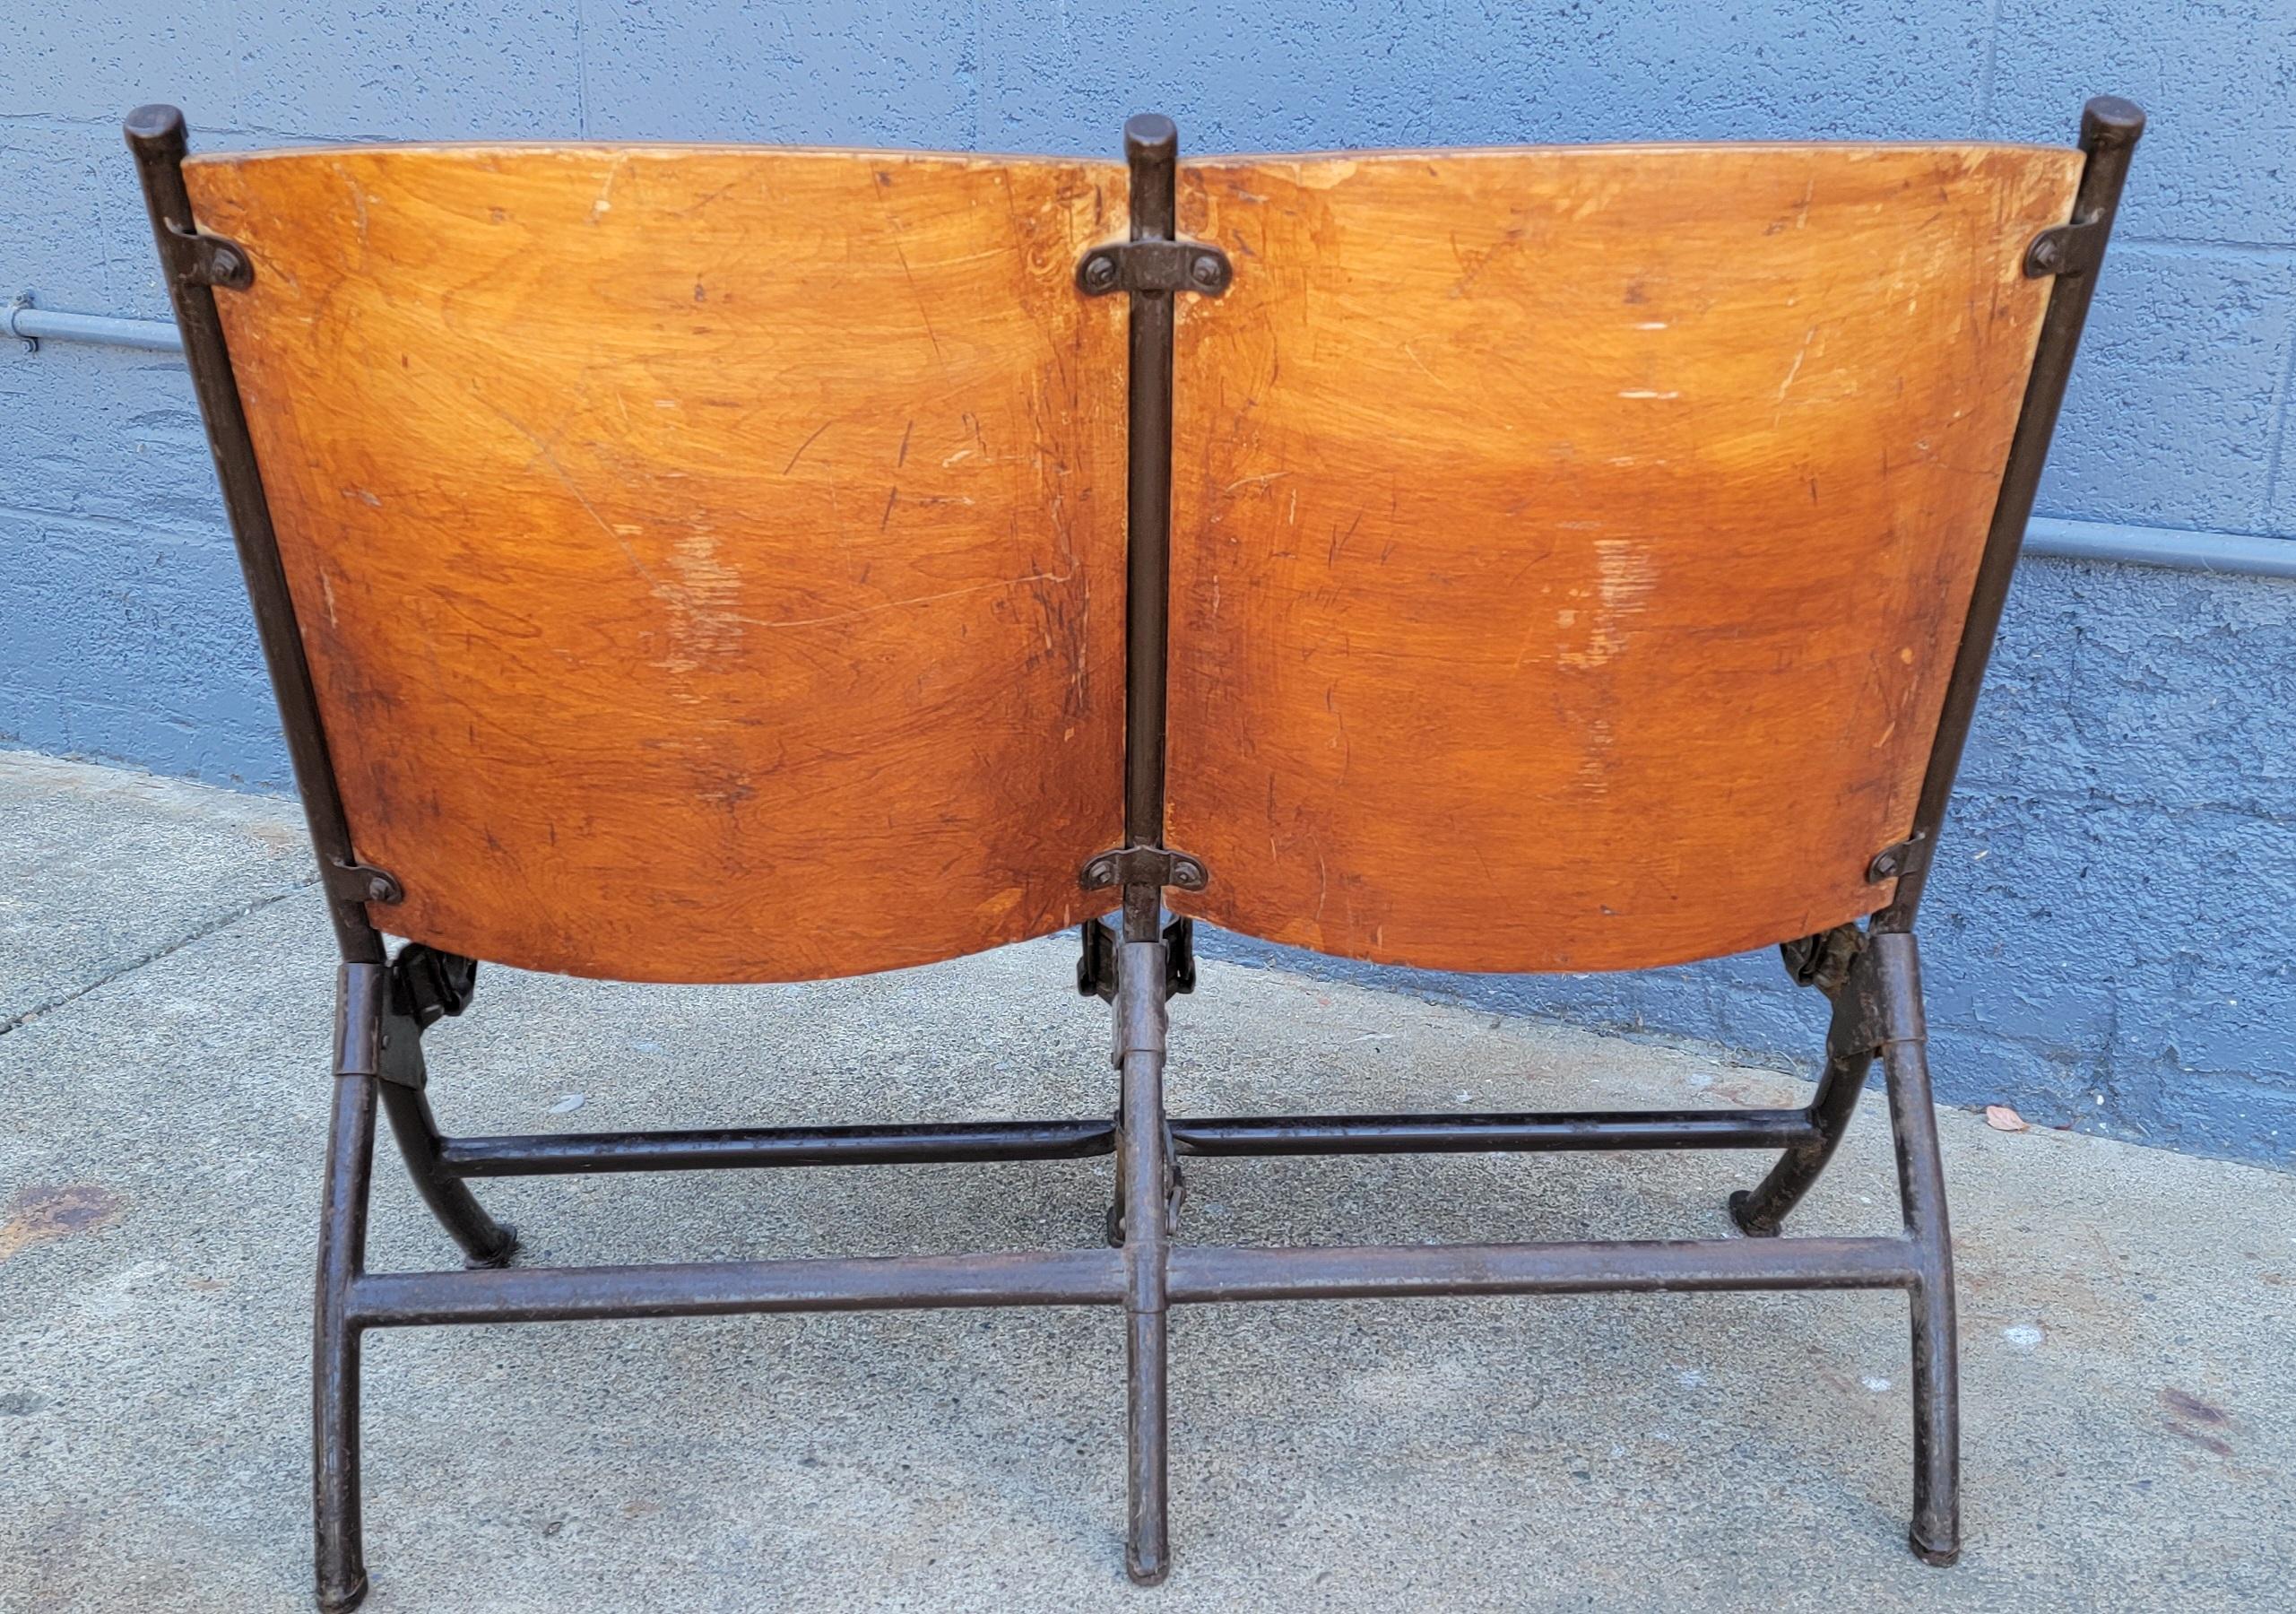 Steel Industrial Folding Theater / Auditorium Chairs, 1930's